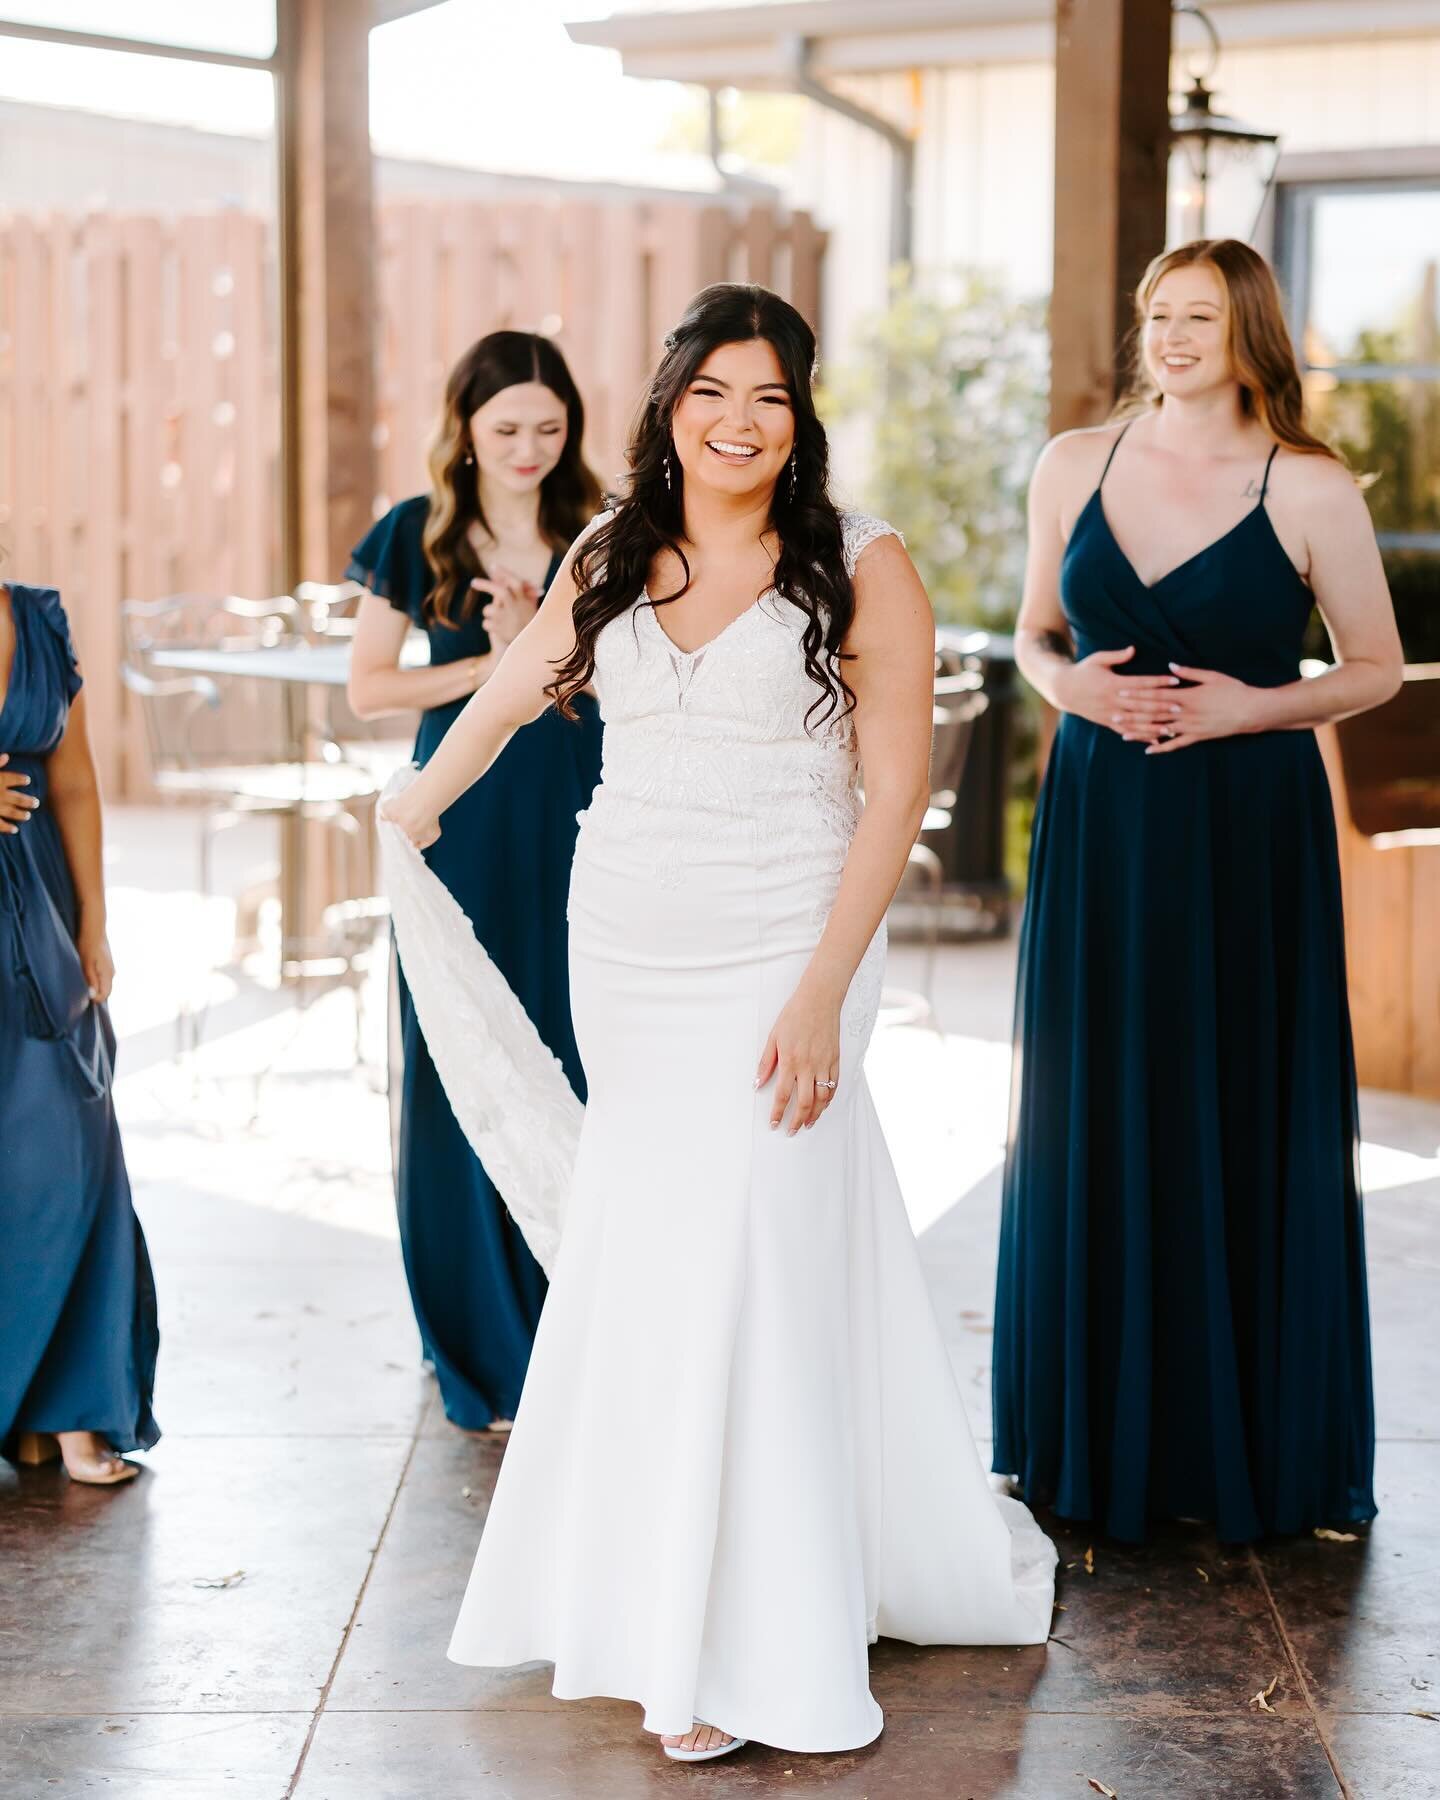 Want to be this happy and stress free on your wedding day?🎇 Here is how ⬇️ 

Here at Rose Briar you get to indulge in the ultimate wedding experience with our all-inclusive wedding package, meticulously curated to turn your dream day into a seamless